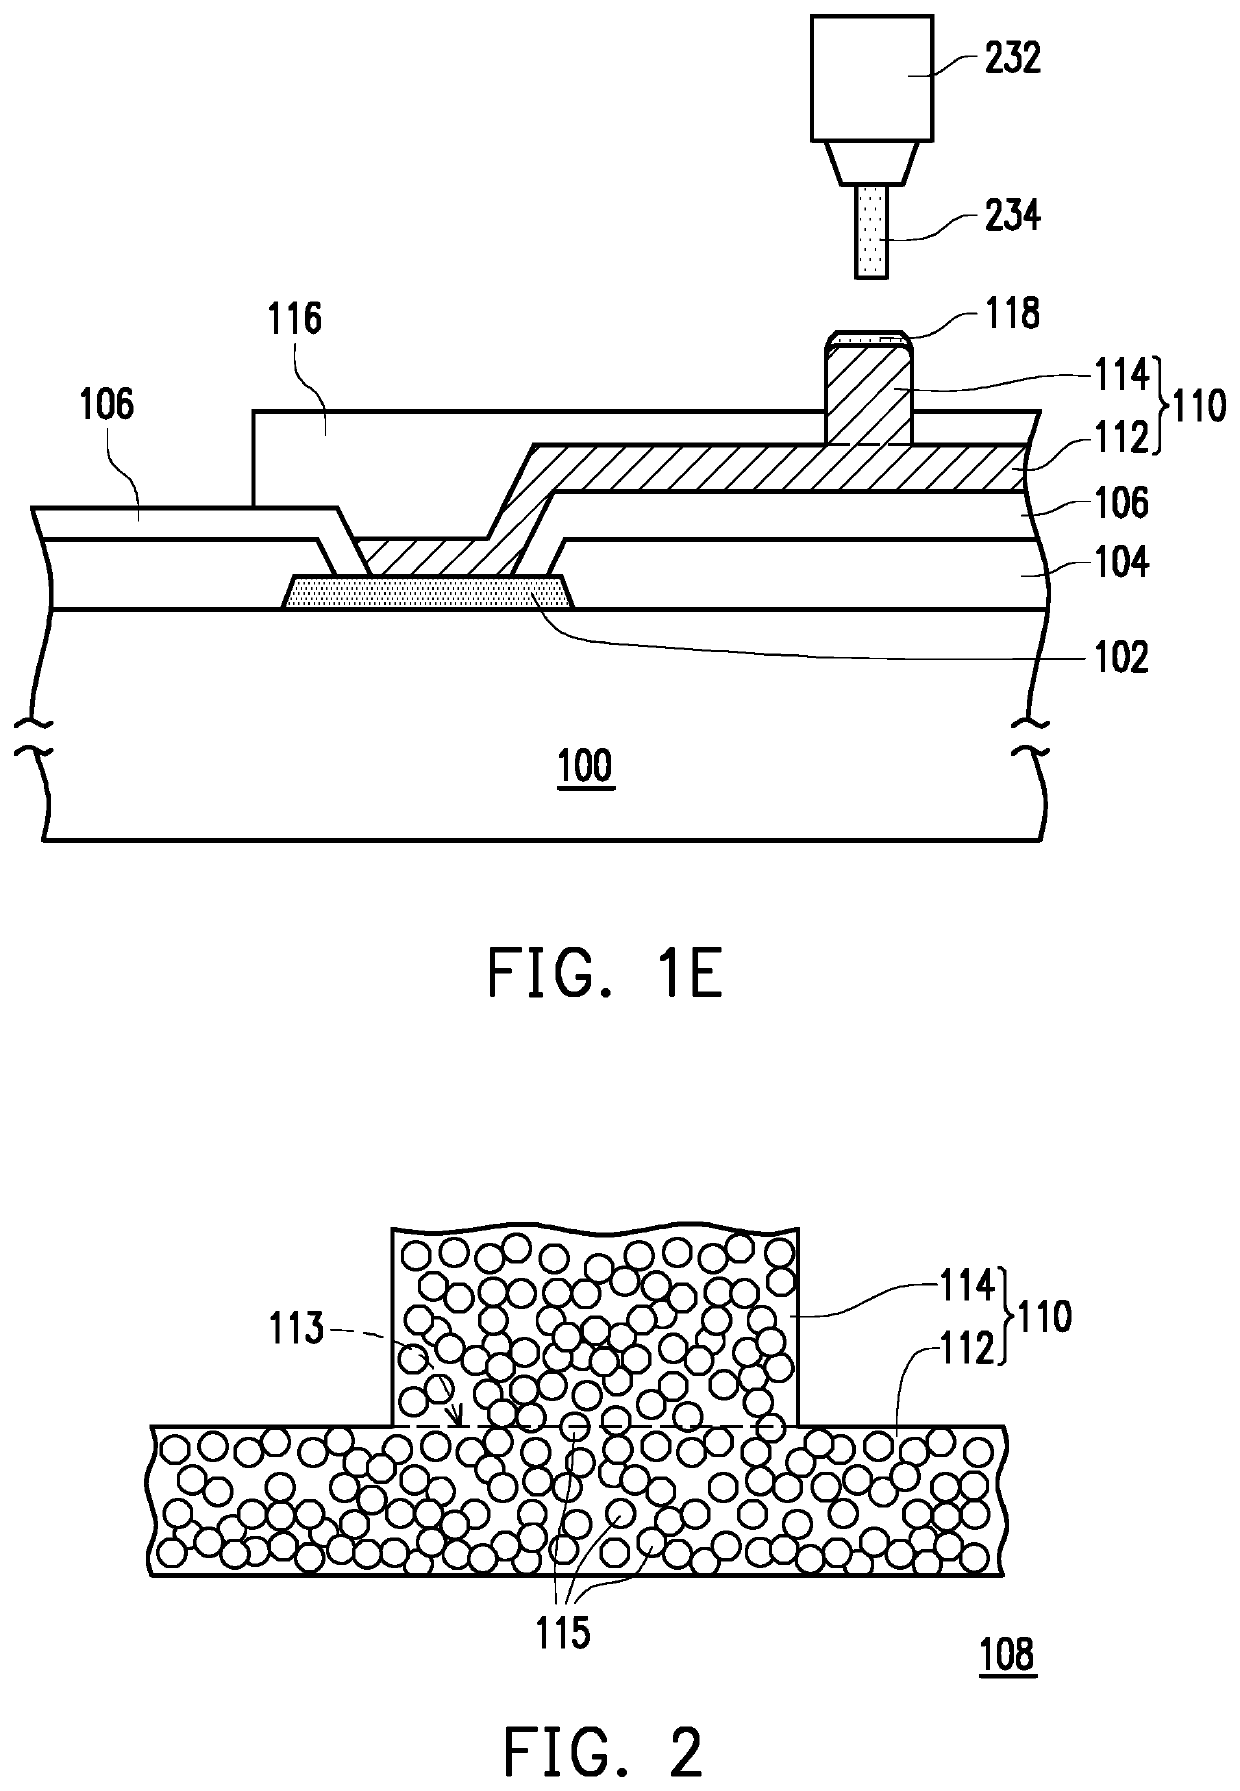 Circuit structure and method of manufacturing the same